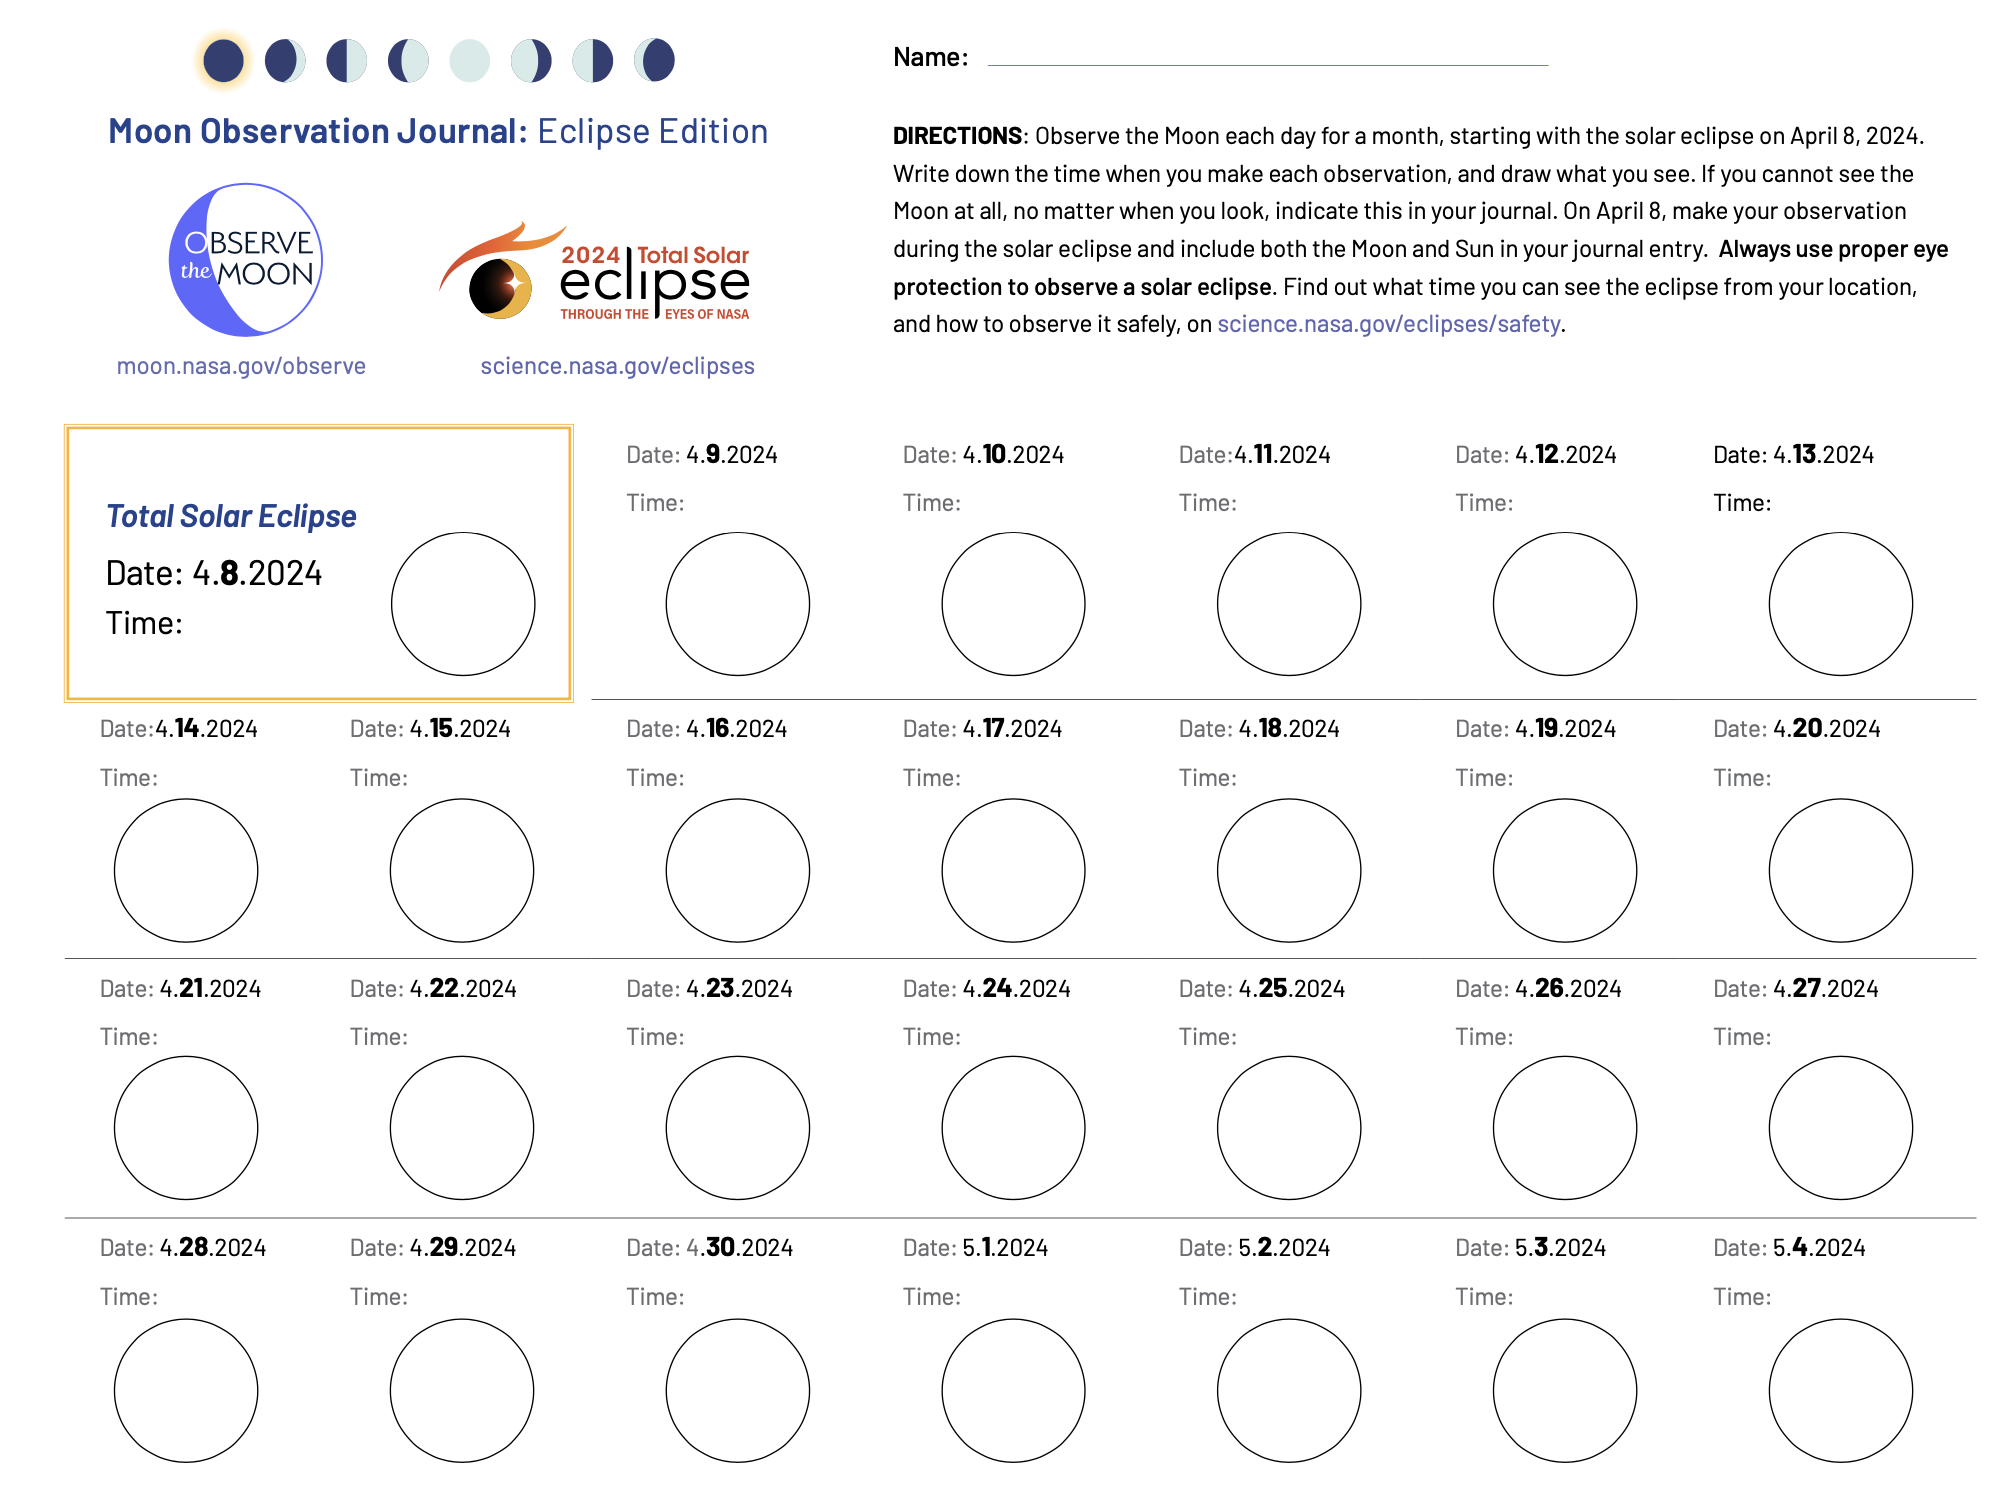 A page of the Moon journal. There are many empty circles on the page, labeled in chronological order from April 8, 2024, to May 4, 2024. The first circle is labeled with instructions